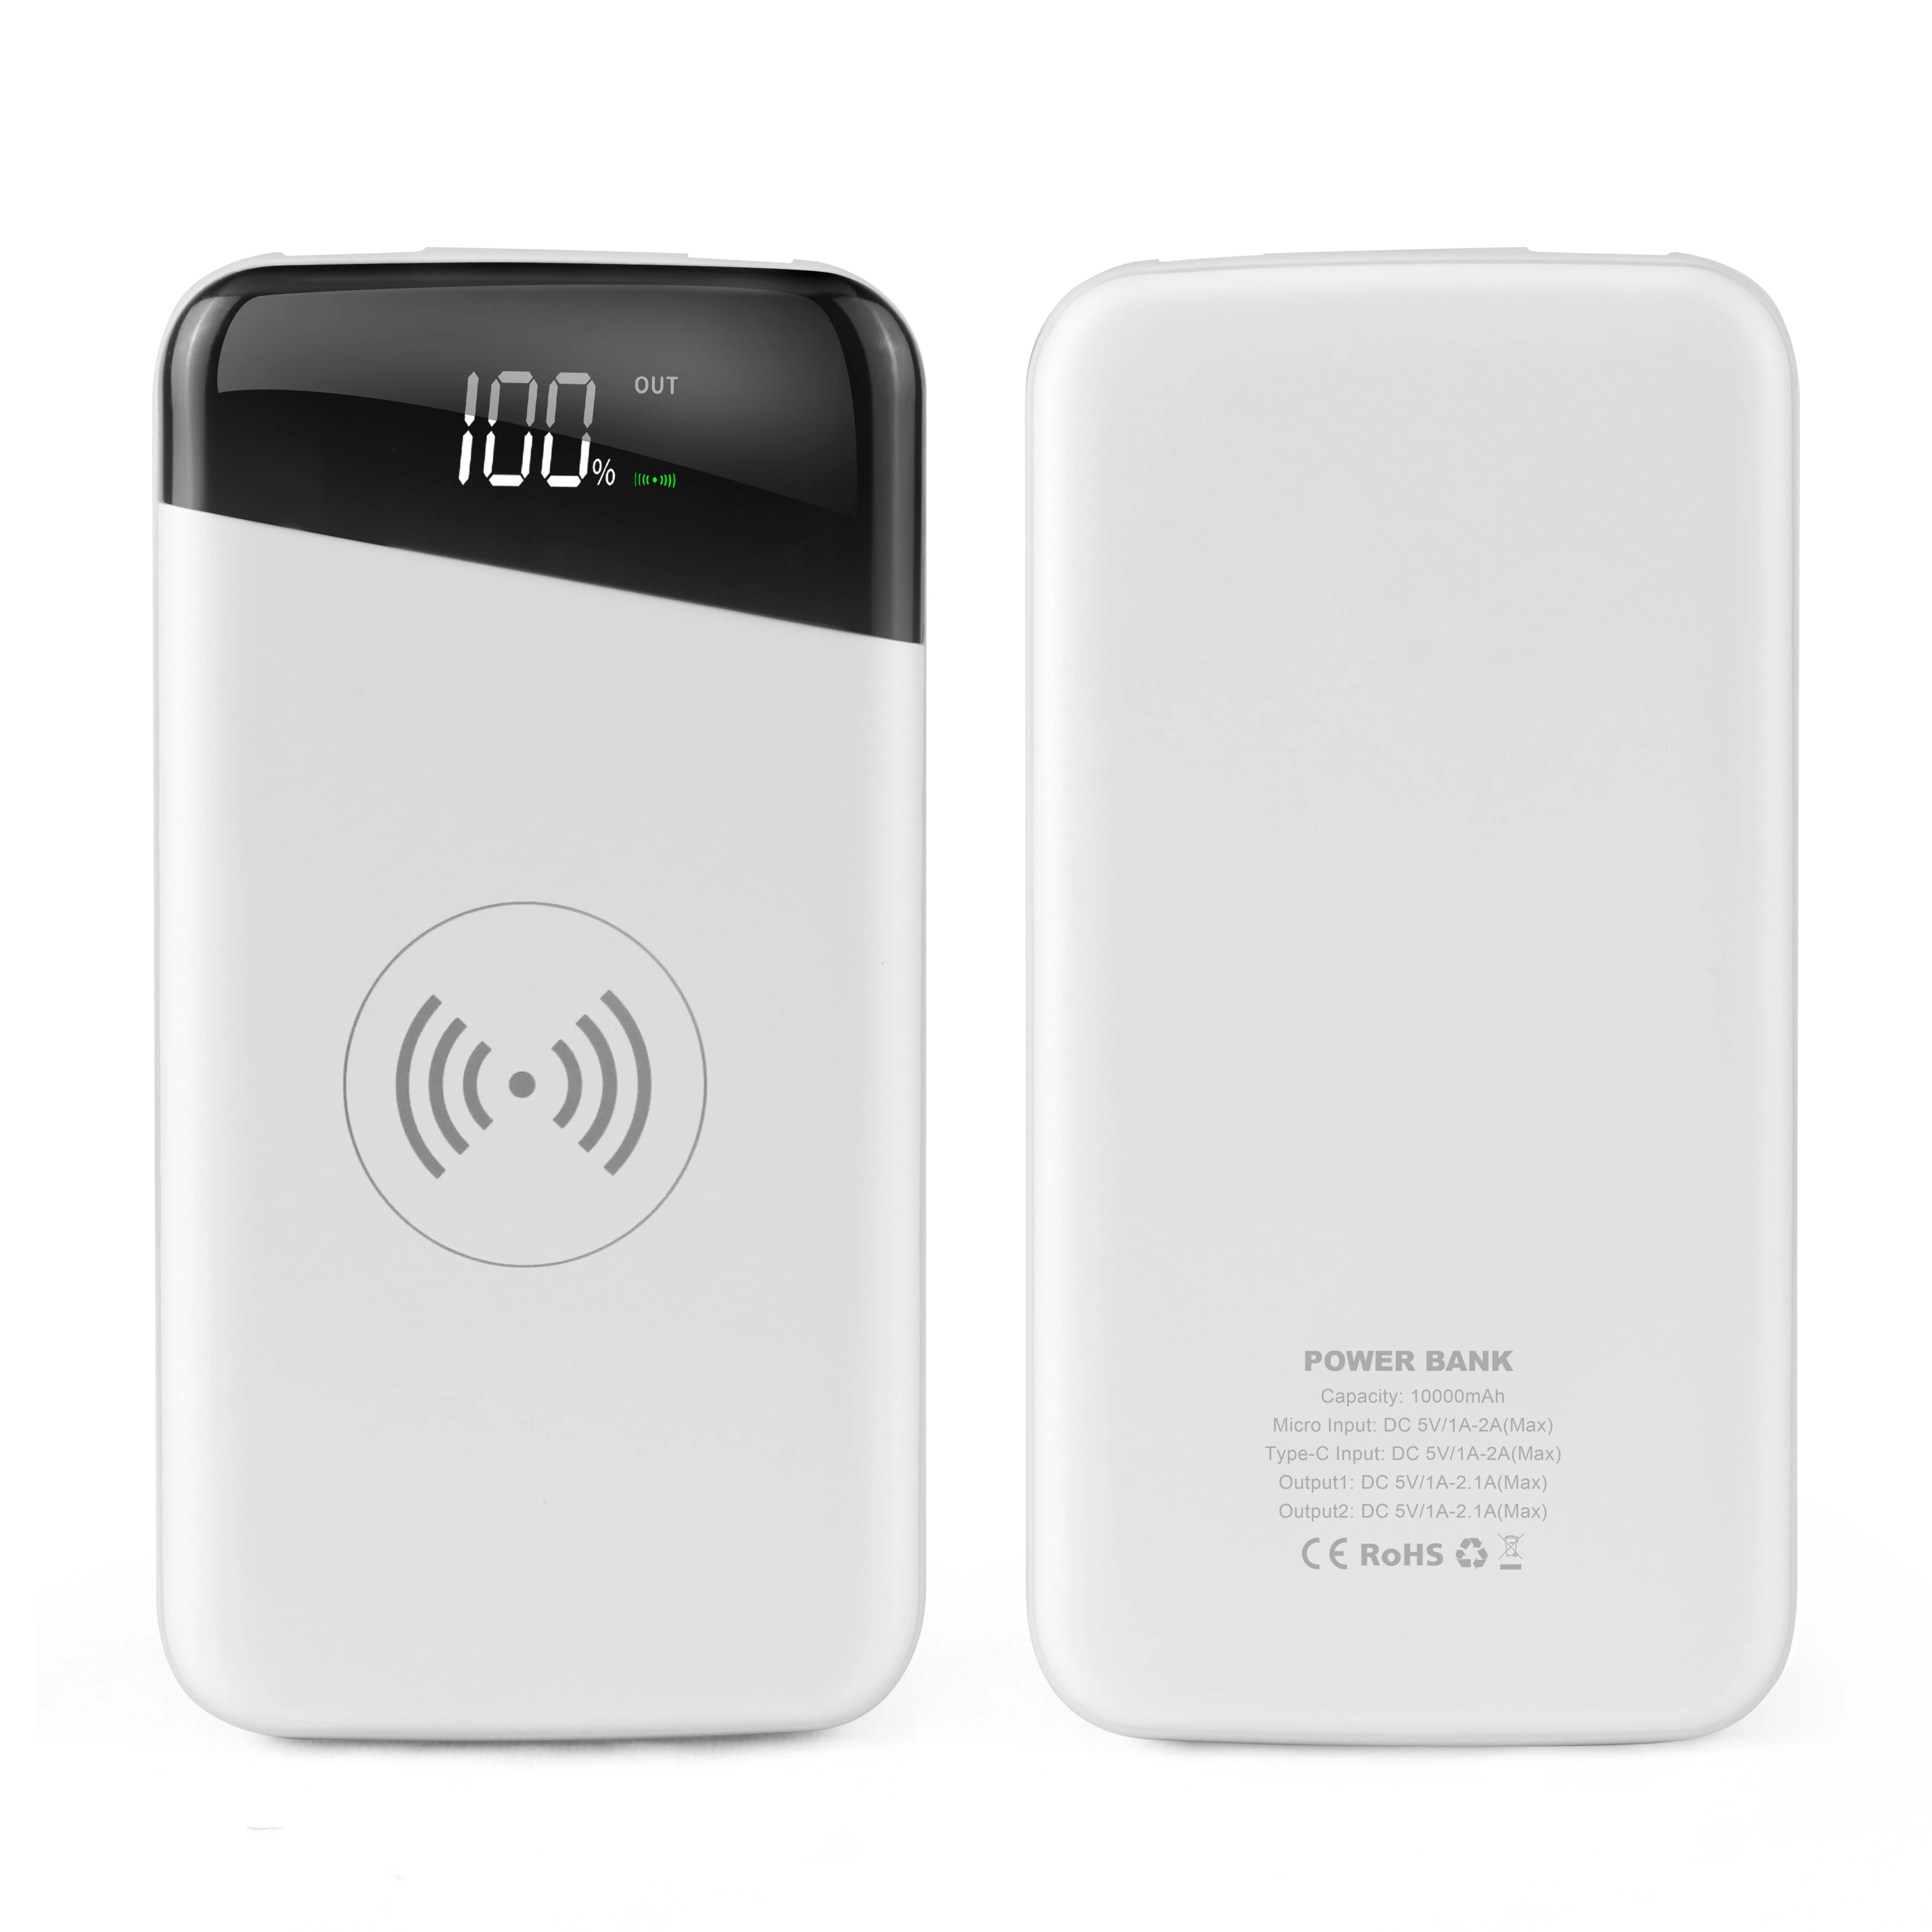 Ultra Slim Wireless charging Portable Battery Charger Cheap Power bank 10000mAh with Digital Display